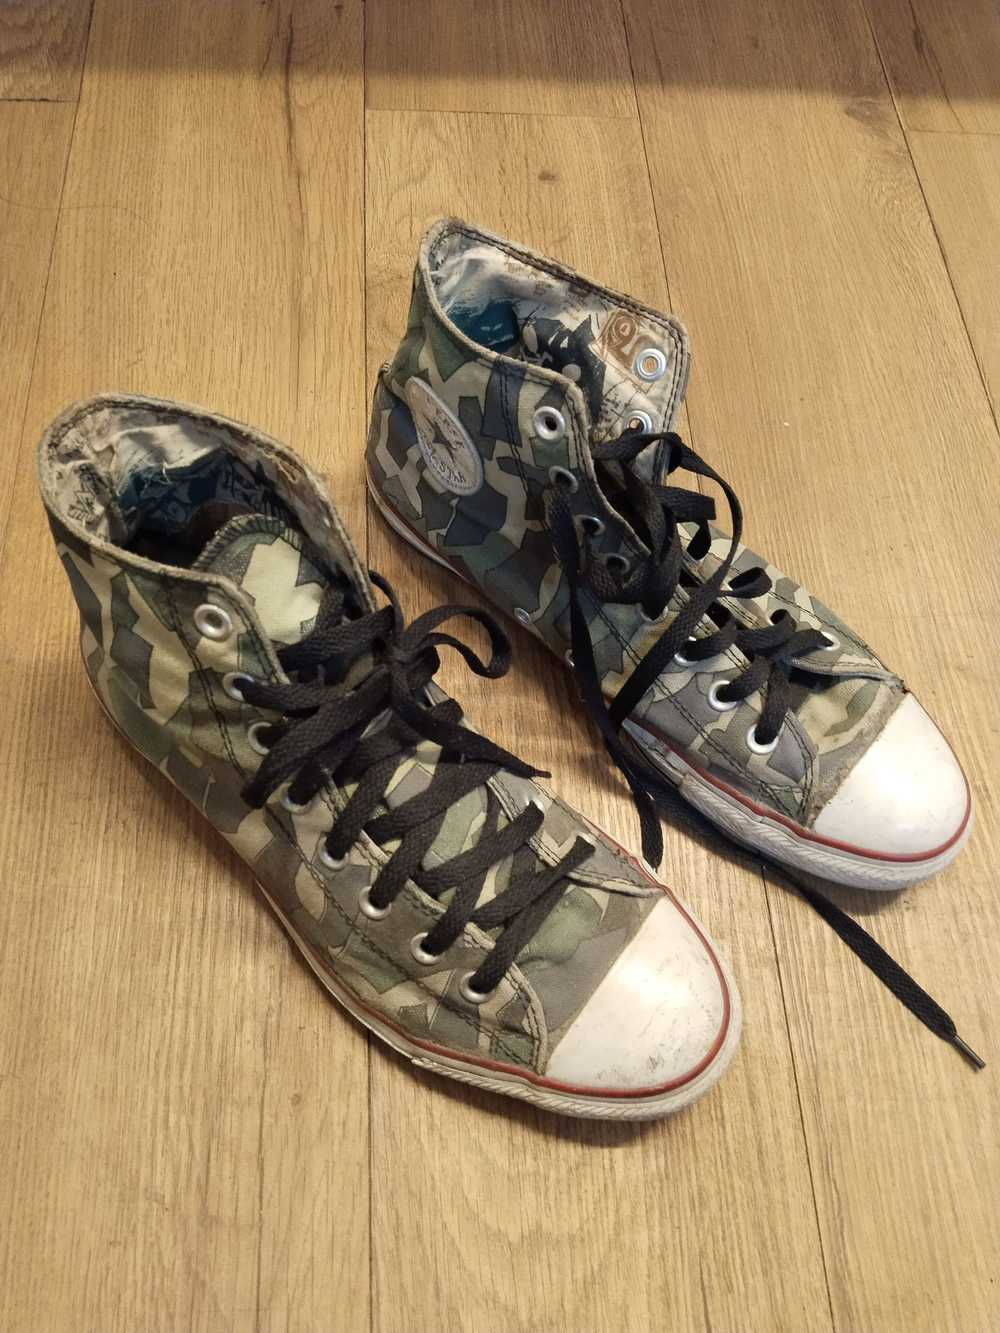 Band Tees × Very Rare × Vintage Converse All Star… - image 2